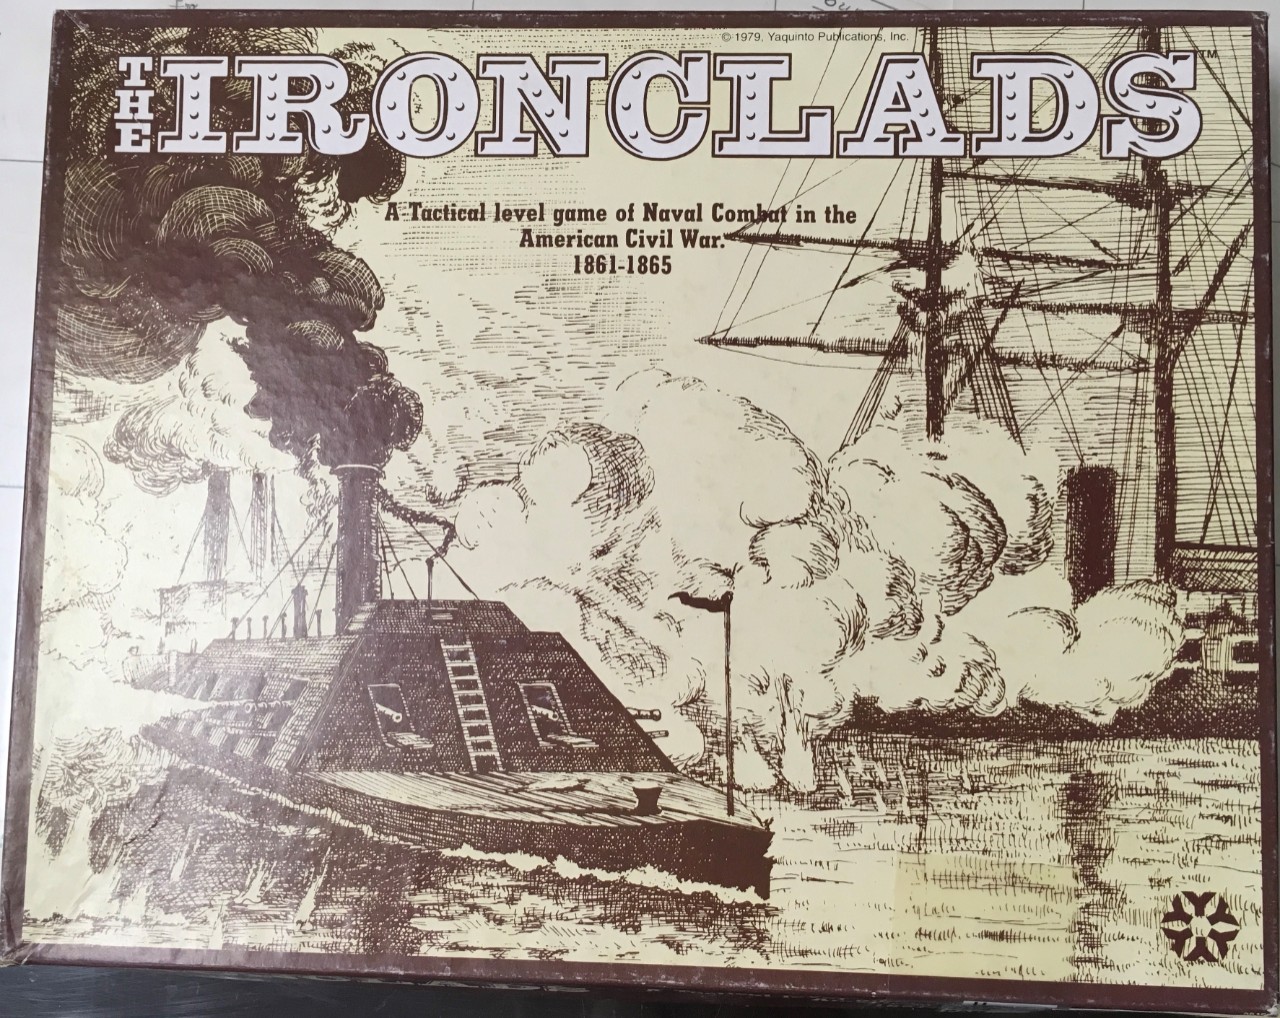 JPEG photo of the cover of the game Ironclads:A Tactical Level Game of Naval Combat in the American Civil War. 1861 – 1865